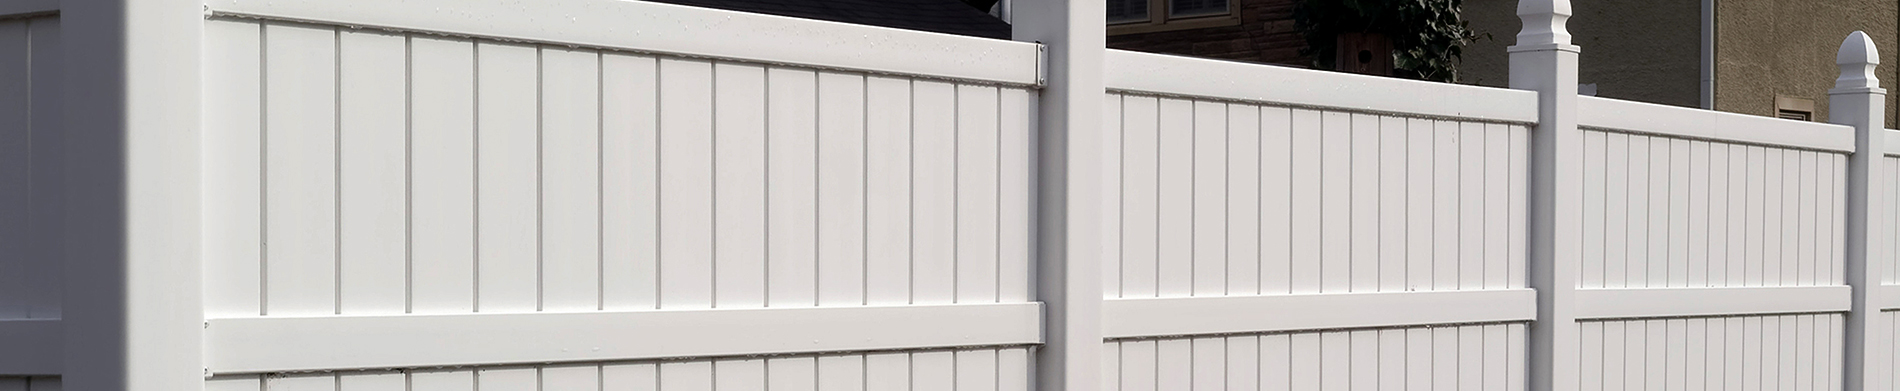 Vinyl VS Wood – Why the Plastic Vinyl Fences Are Stronger and Better?